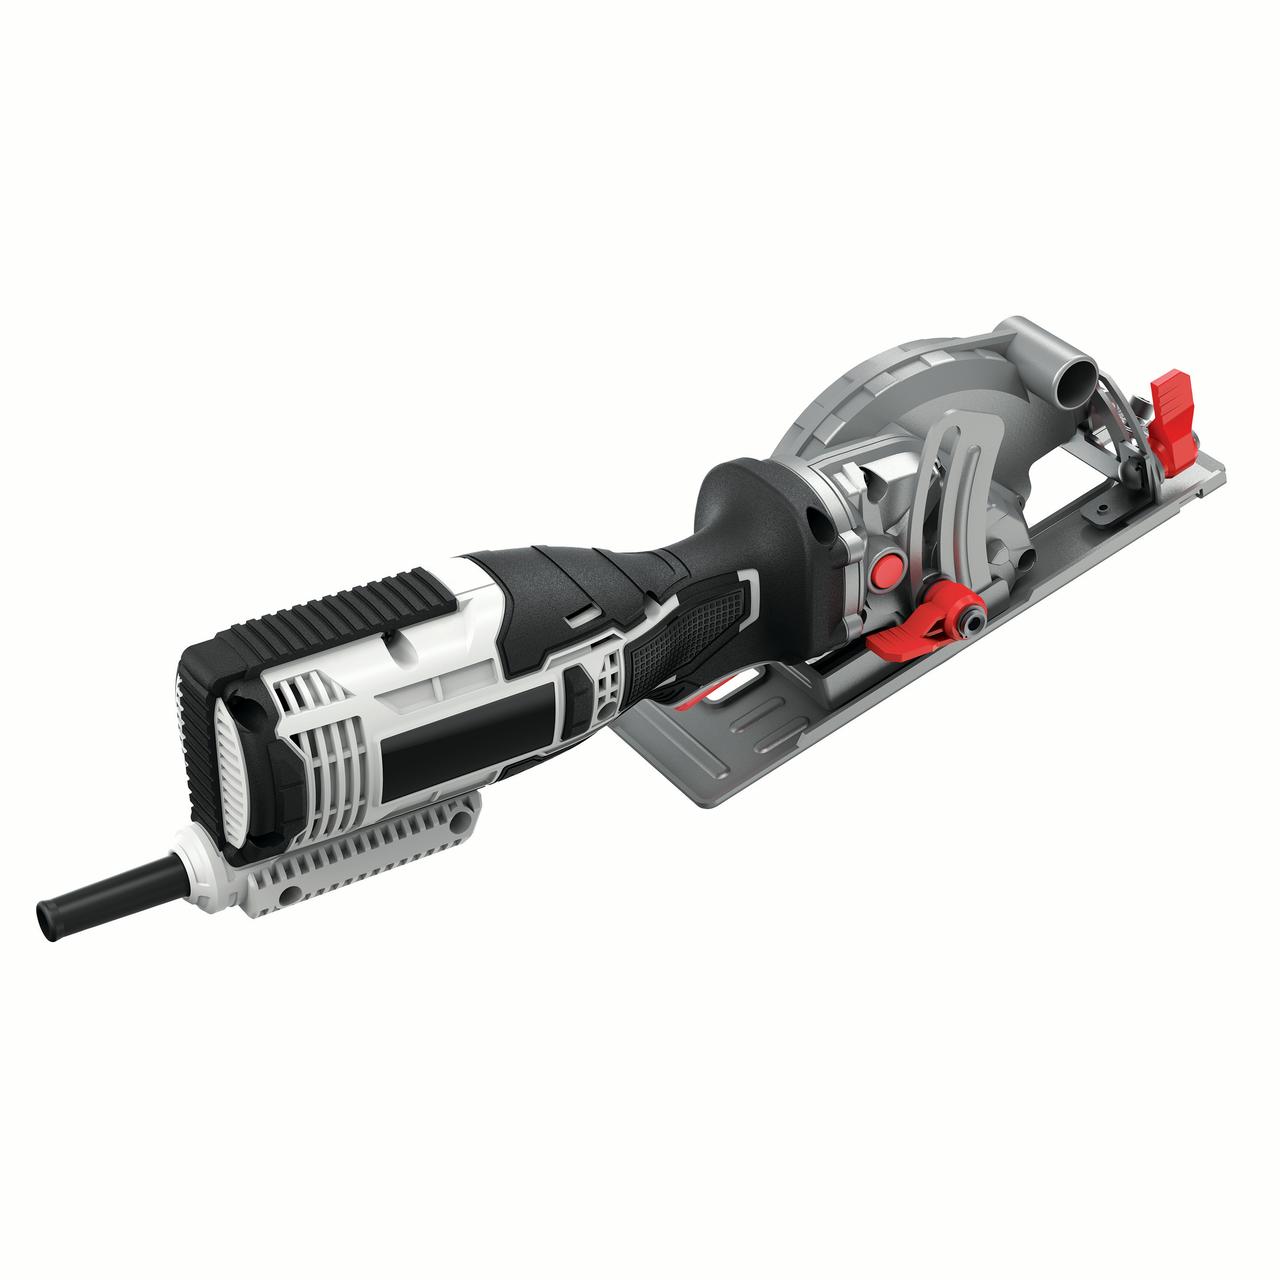 PORTER CABLE 5.5-Amp 4.5-Inch Compact Circular Saw Kit, PCE381K - image 3 of 3